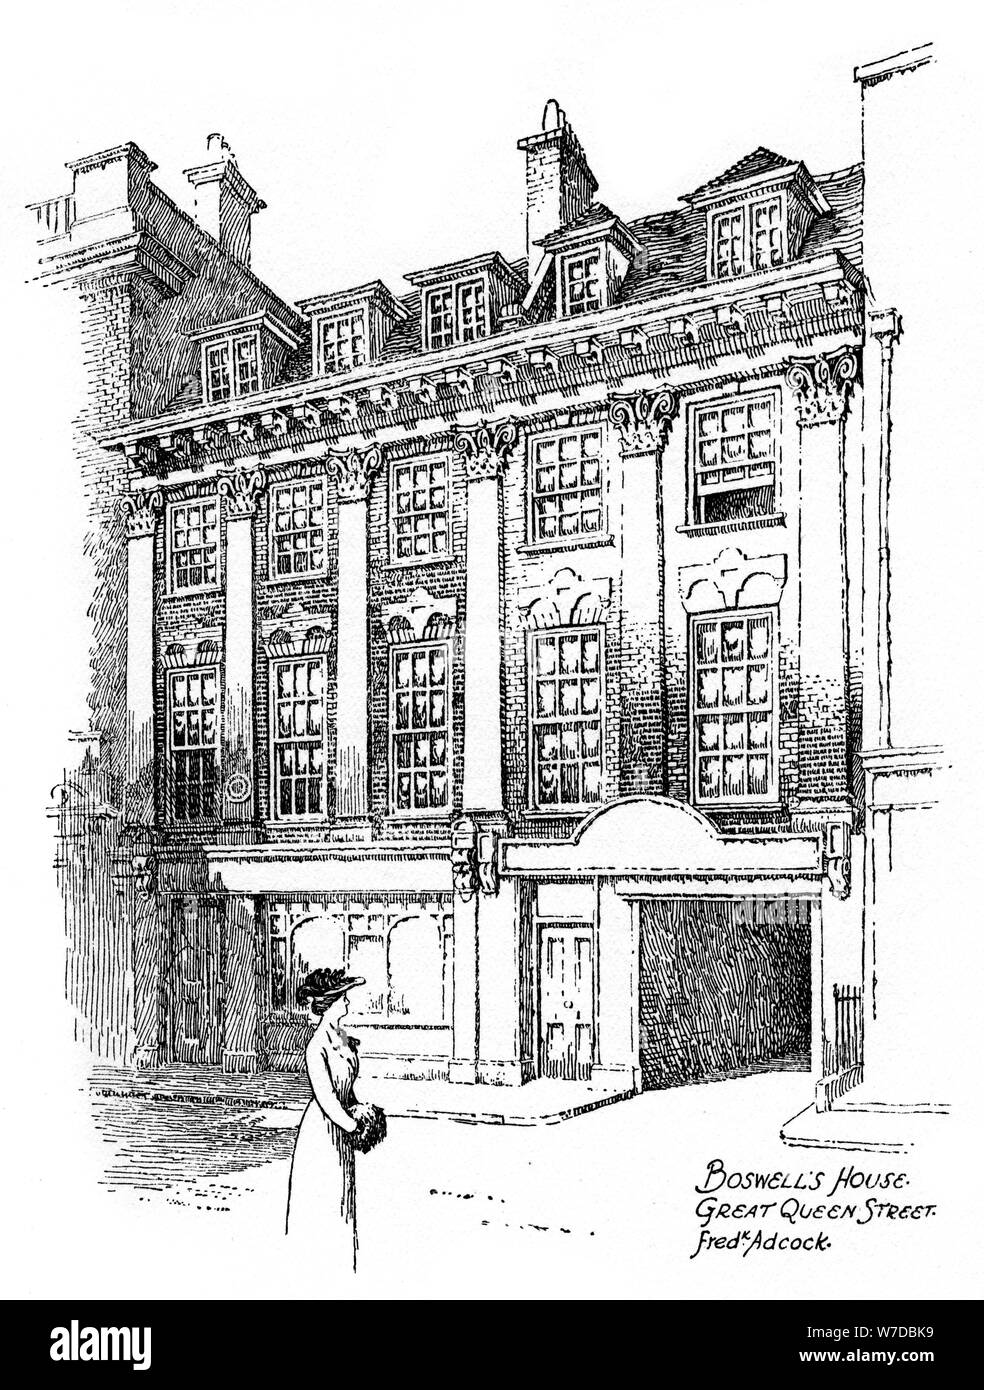 James Boswell's house, Great Queen Street, Covent Garden, Londres, 1912. Artiste : Frederick Adcock Banque D'Images